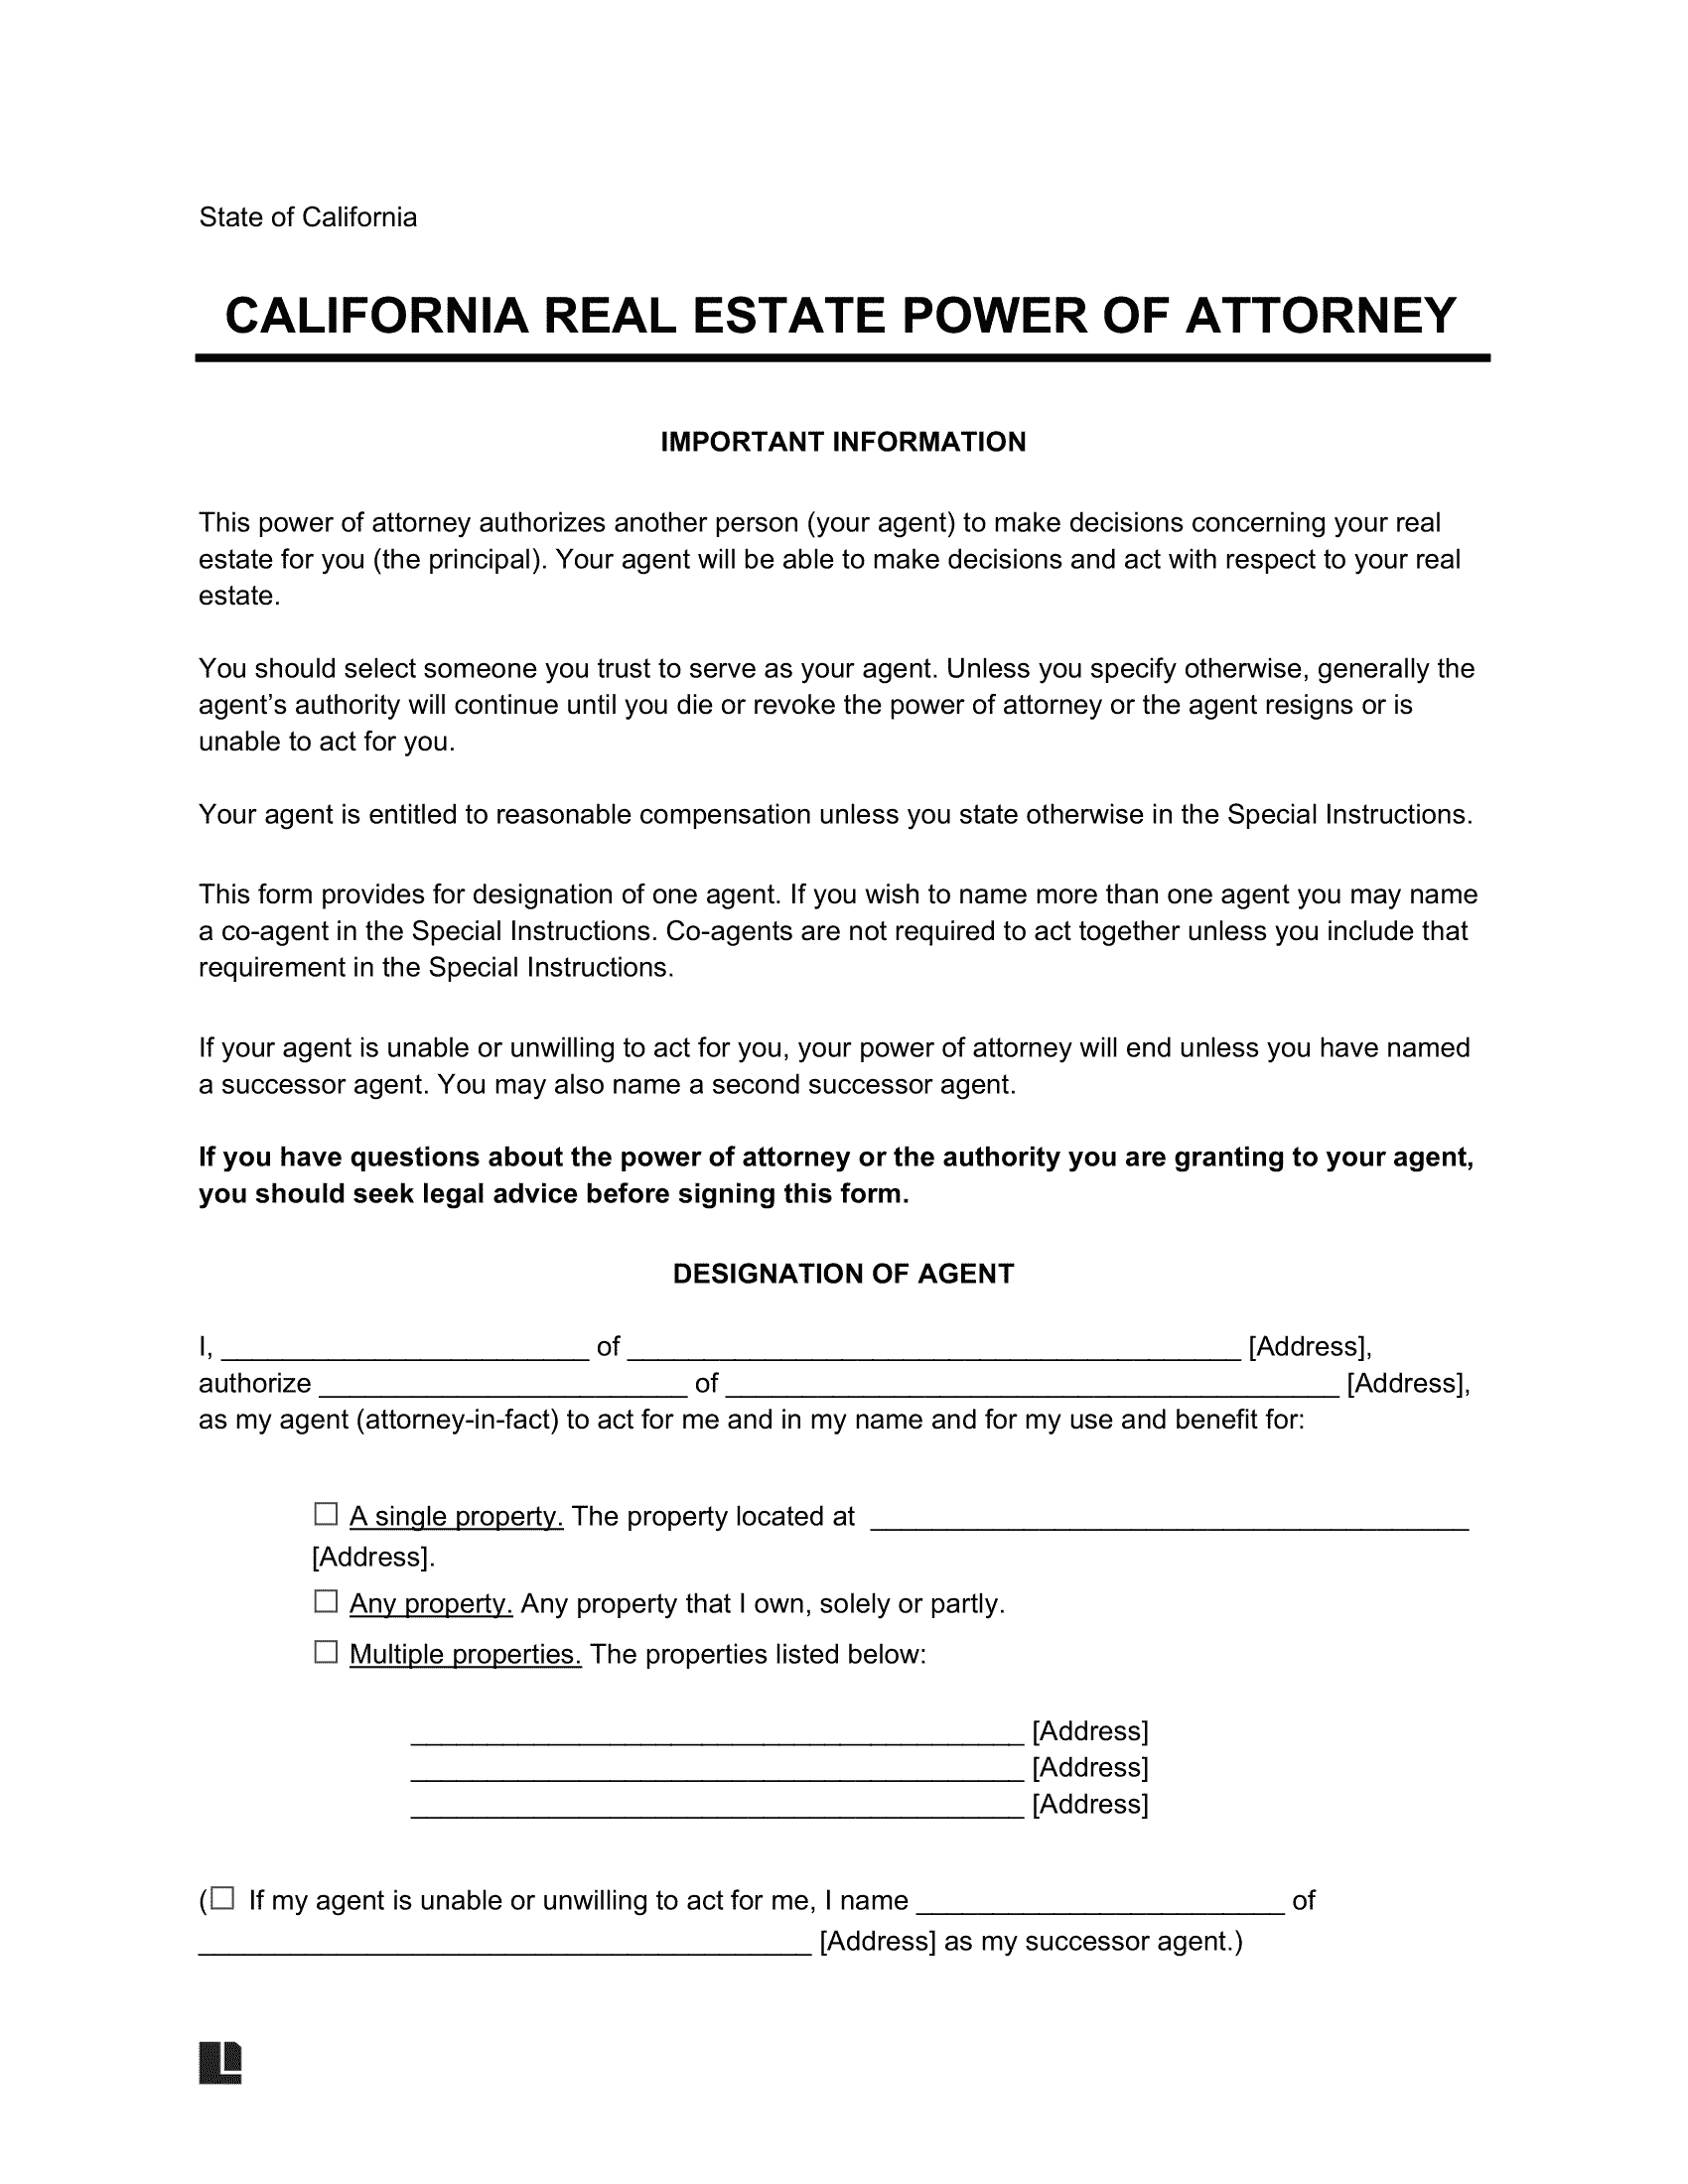 California Real Estate Power of Attorney Form